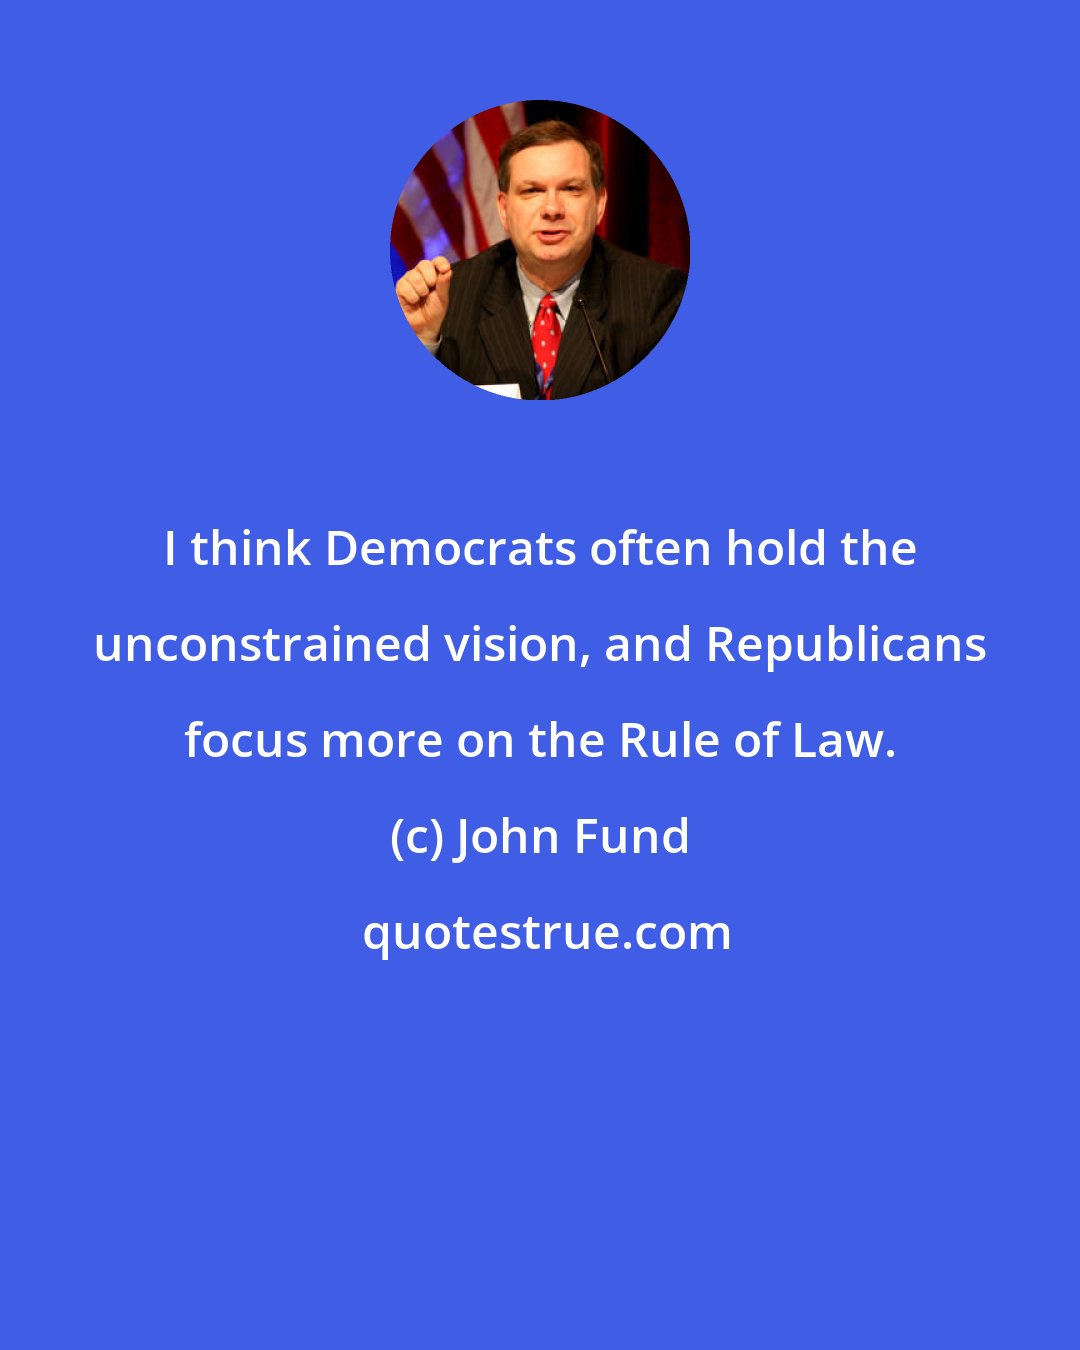 John Fund: I think Democrats often hold the unconstrained vision, and Republicans focus more on the Rule of Law.